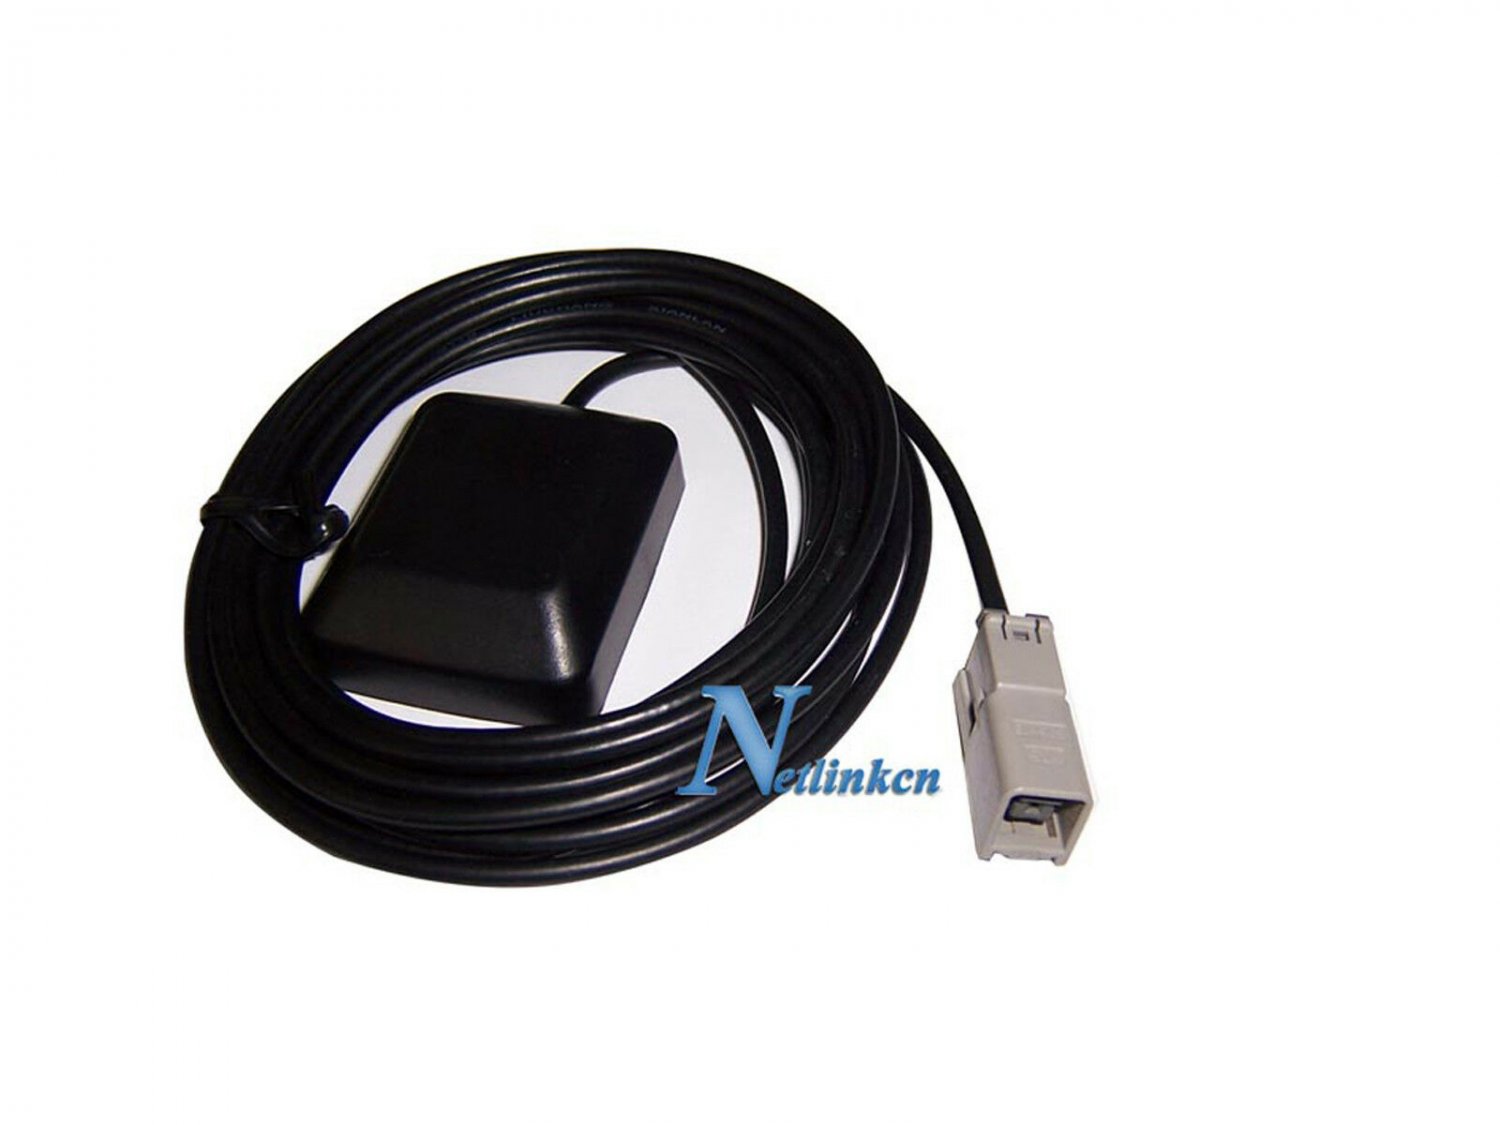 ACTIVE GPS NAVIGATION ANTENNA FOR JVC KW-NT800HDT KW-NT700 KW-NT500HDT KW-NT300